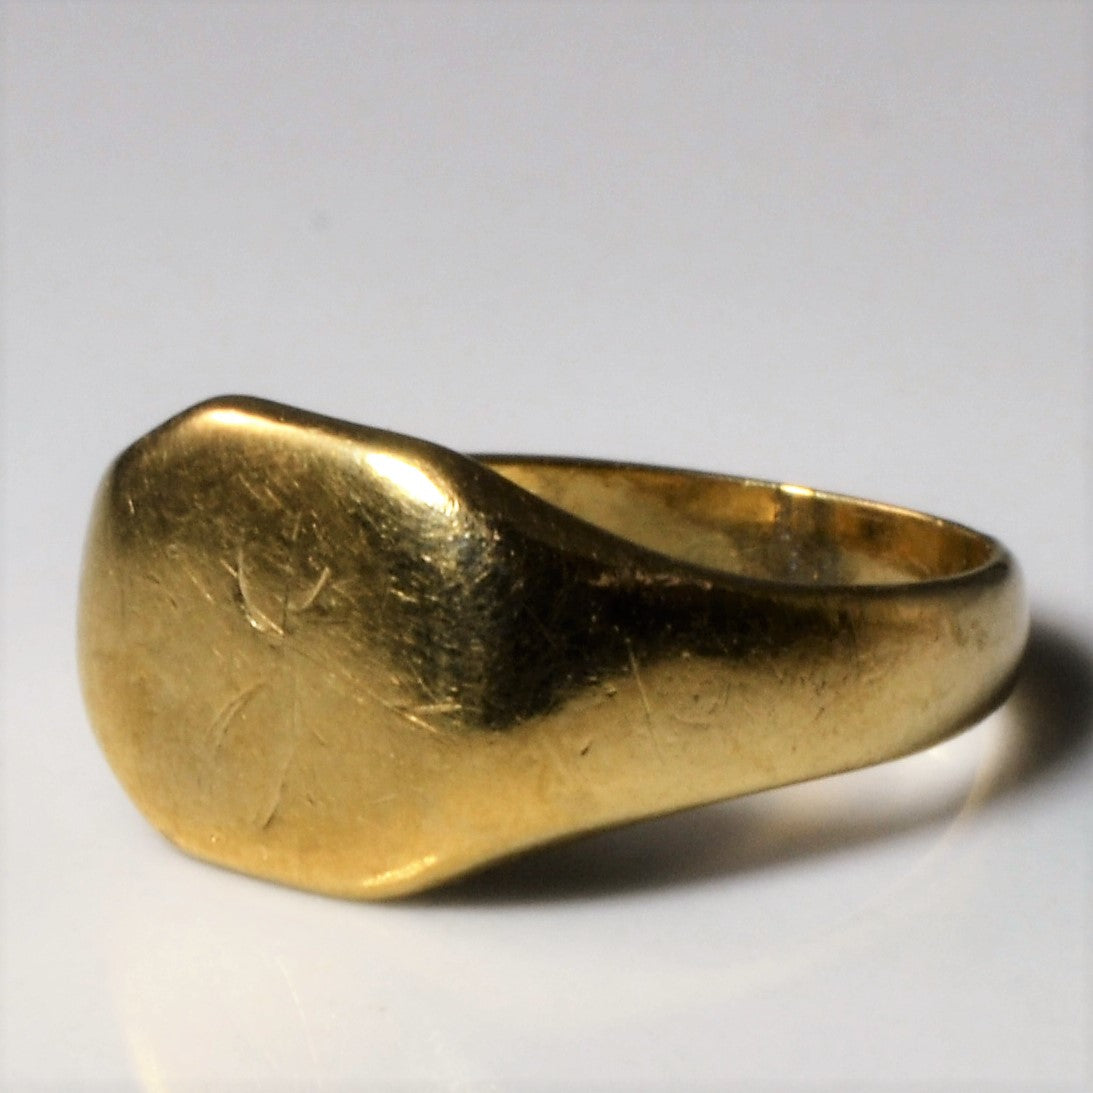 Faintly Engraved Initial 'J' Ring | SZ 2.25 |